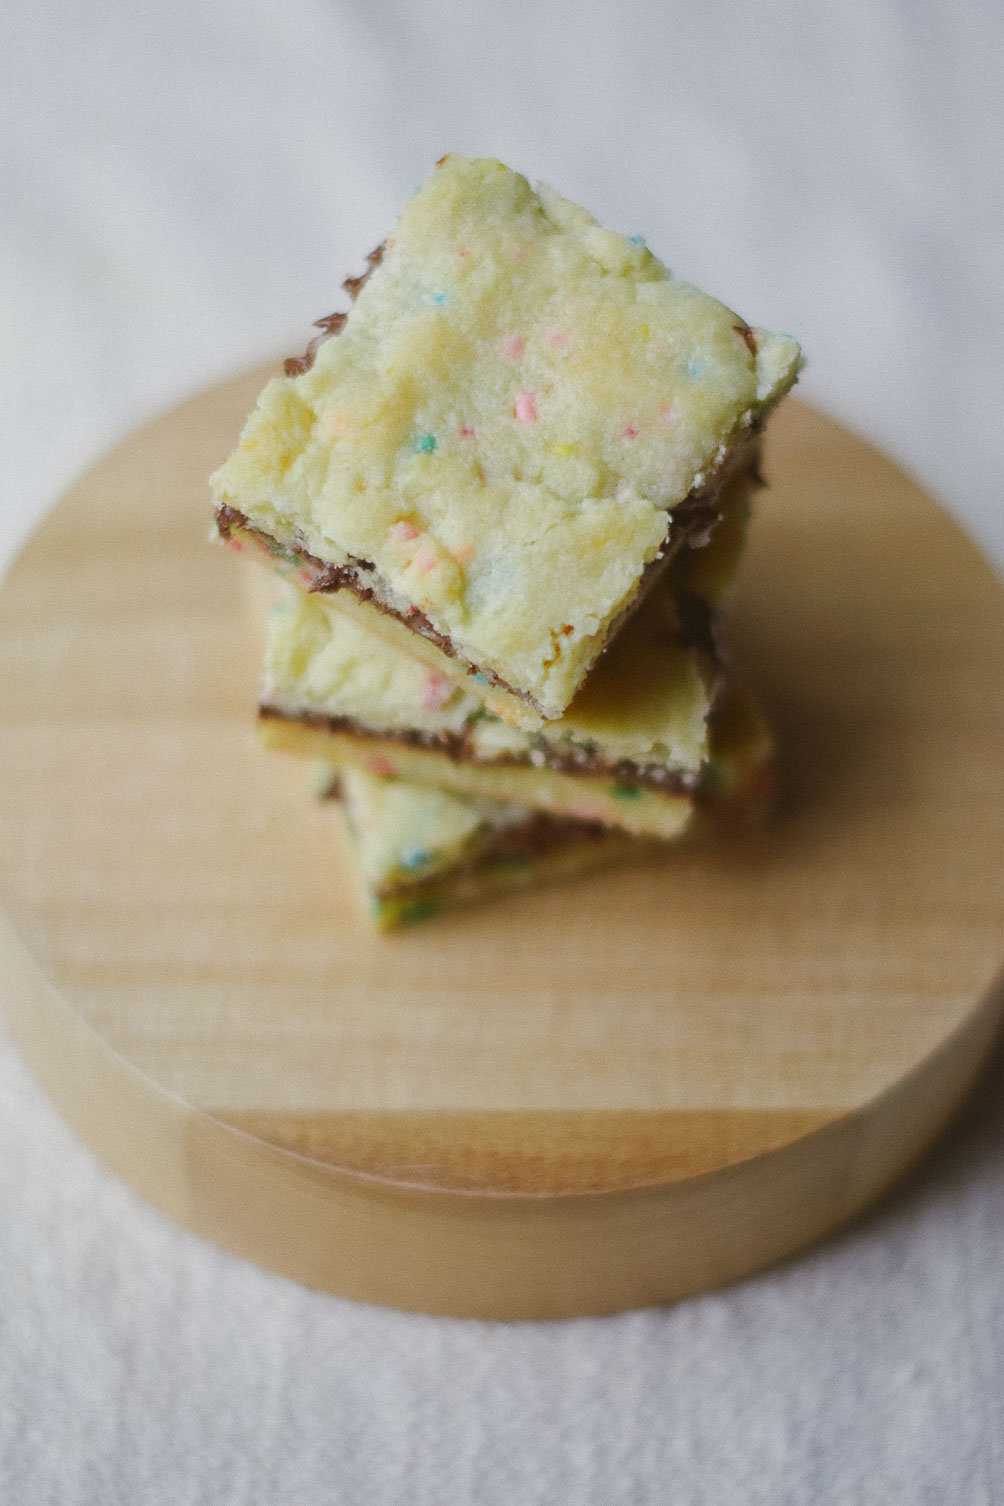 cooking up an easy spring dessert recipe for nutella crumble funfetti cake bars